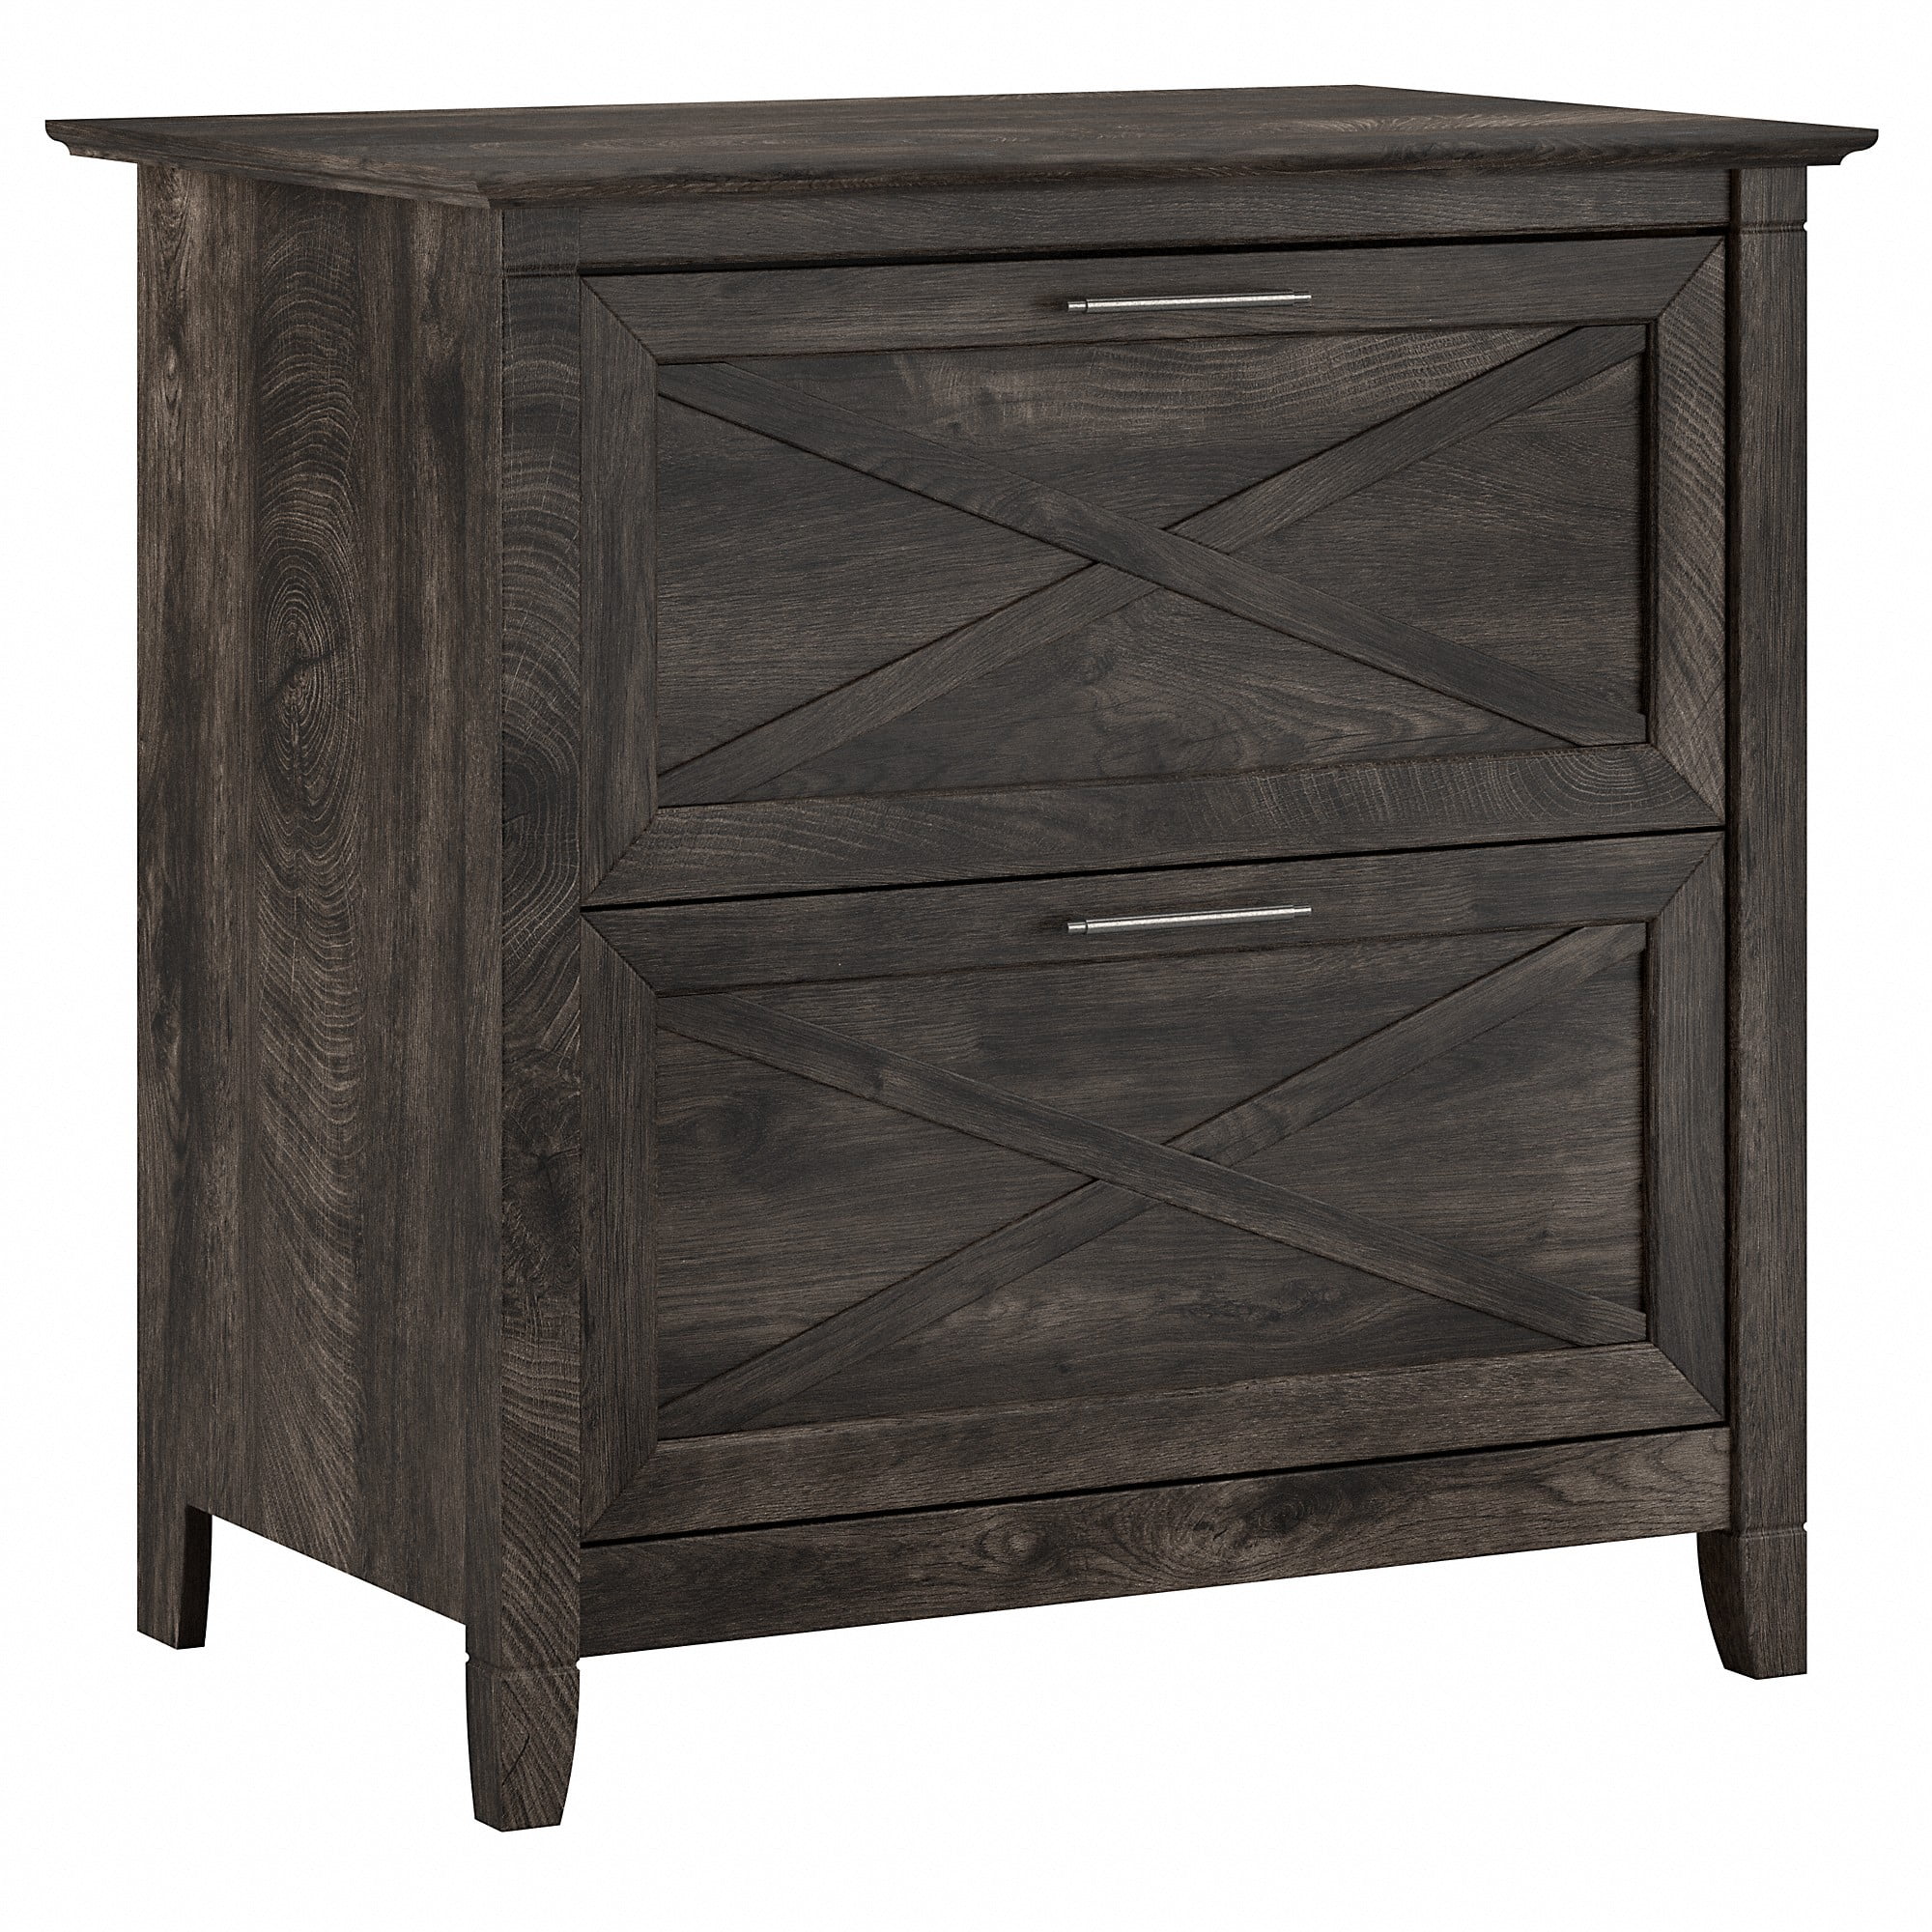 Bush Refinery 2 Drawer Lateral File Cabinet in Rustic Gray 